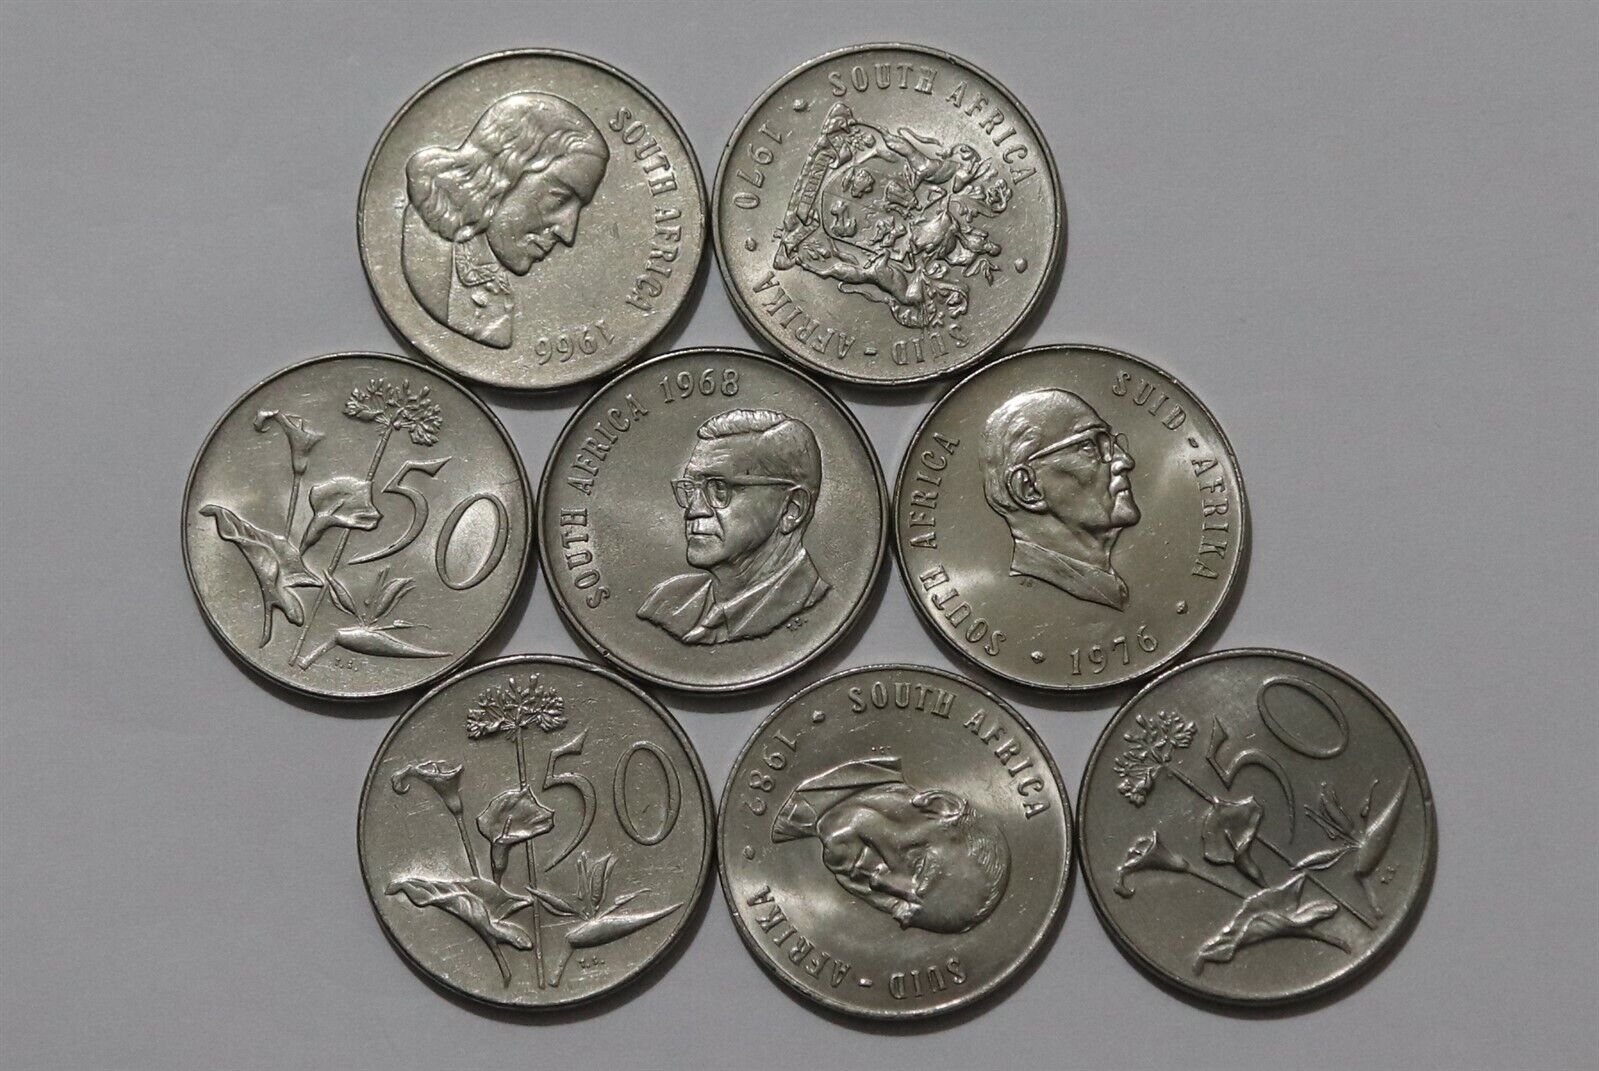 SOUTH AFRICA 50 CENTS COLLECTION B41 YB30